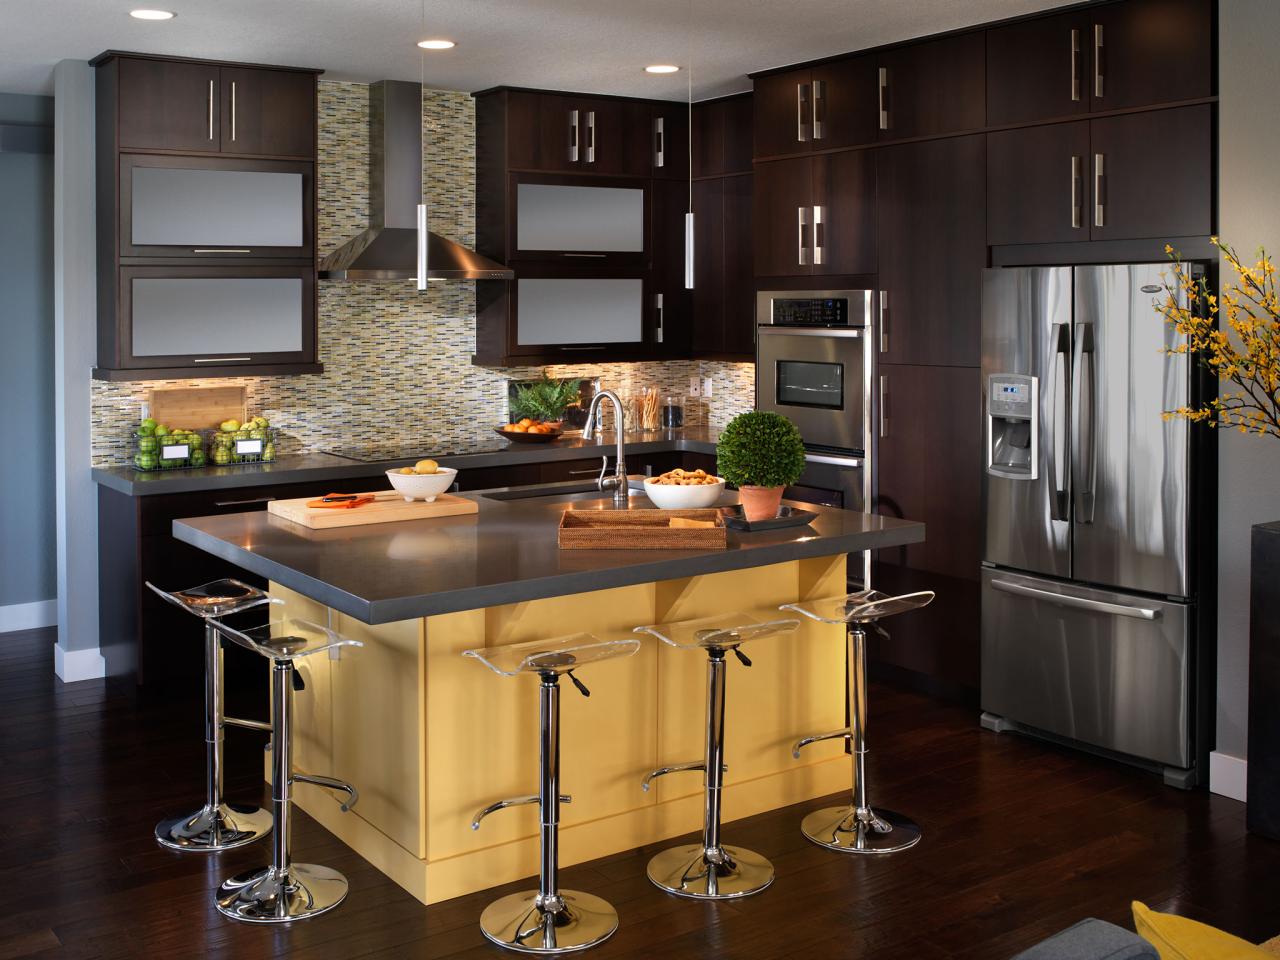 Painting Kitchen Countertops Pictures Options Ideas Hgtv,Most Comfortable Sectionals Canada